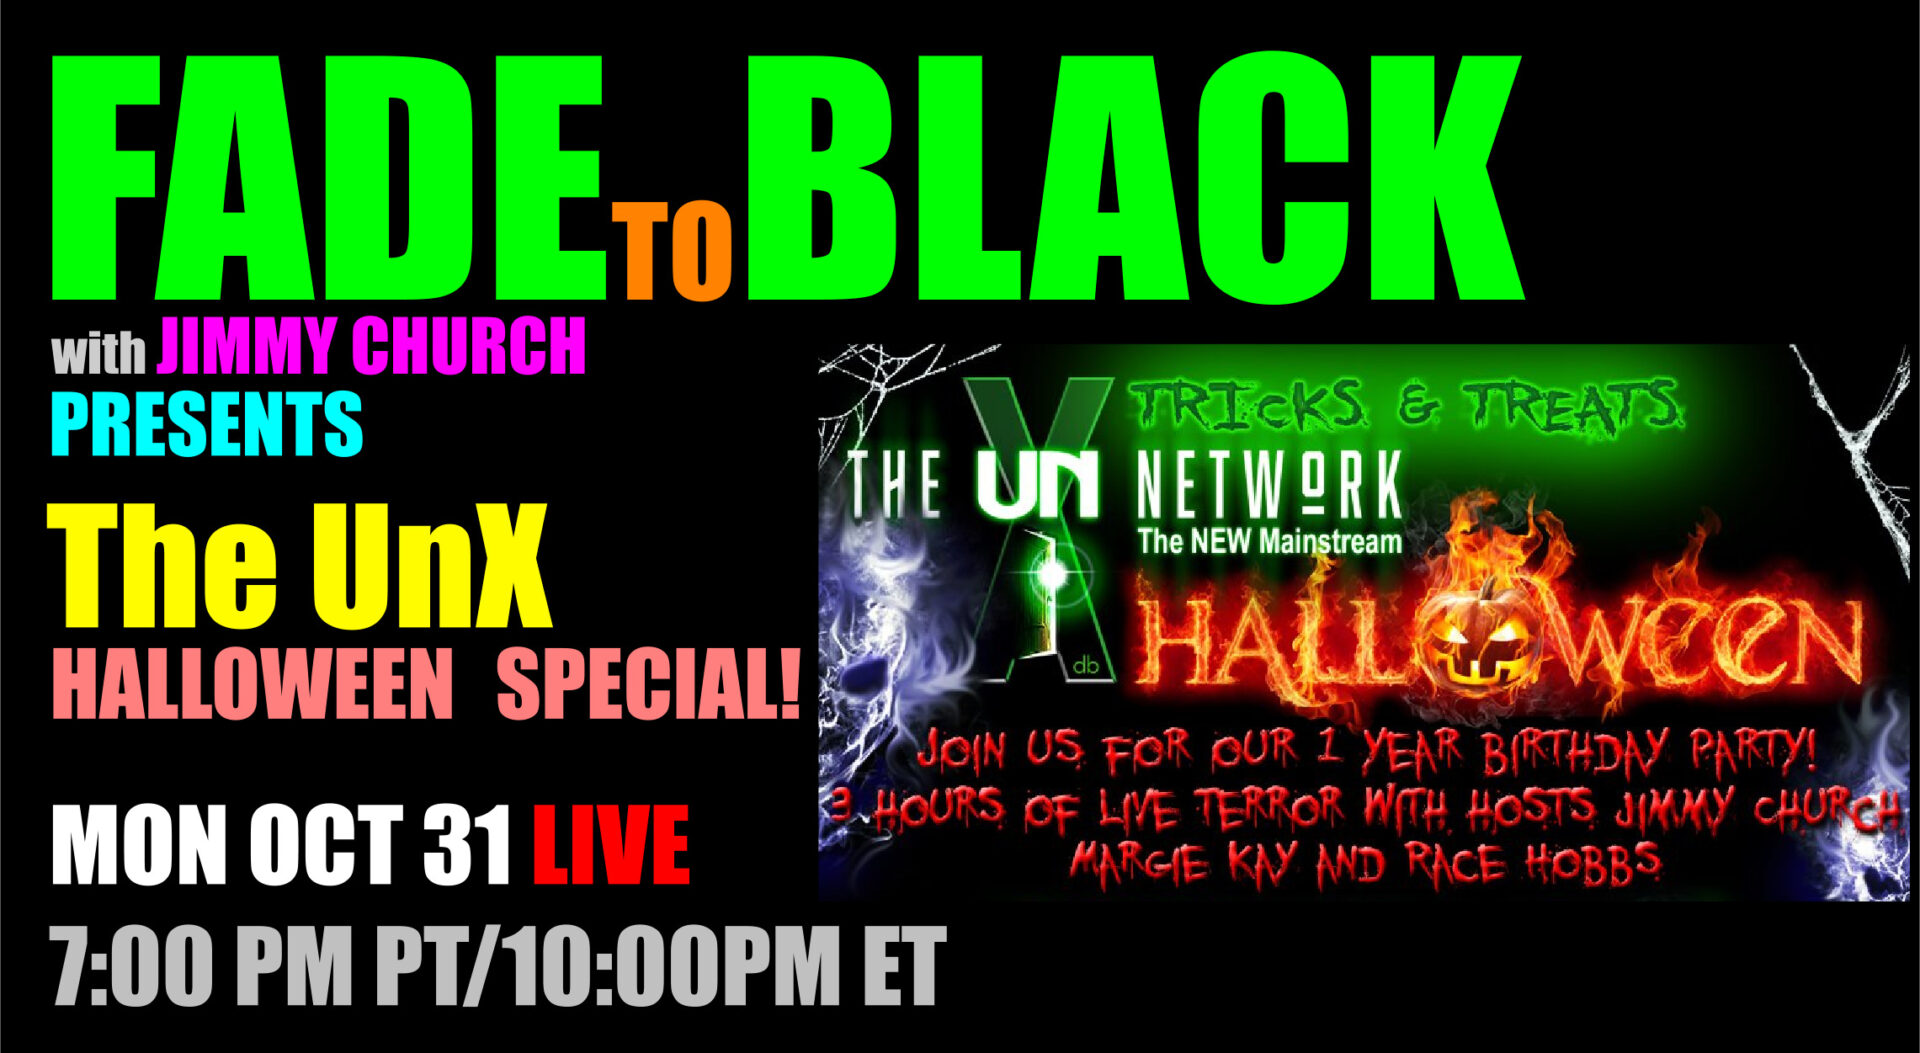 Fade To Black - UnX Halloween Special - October 31st